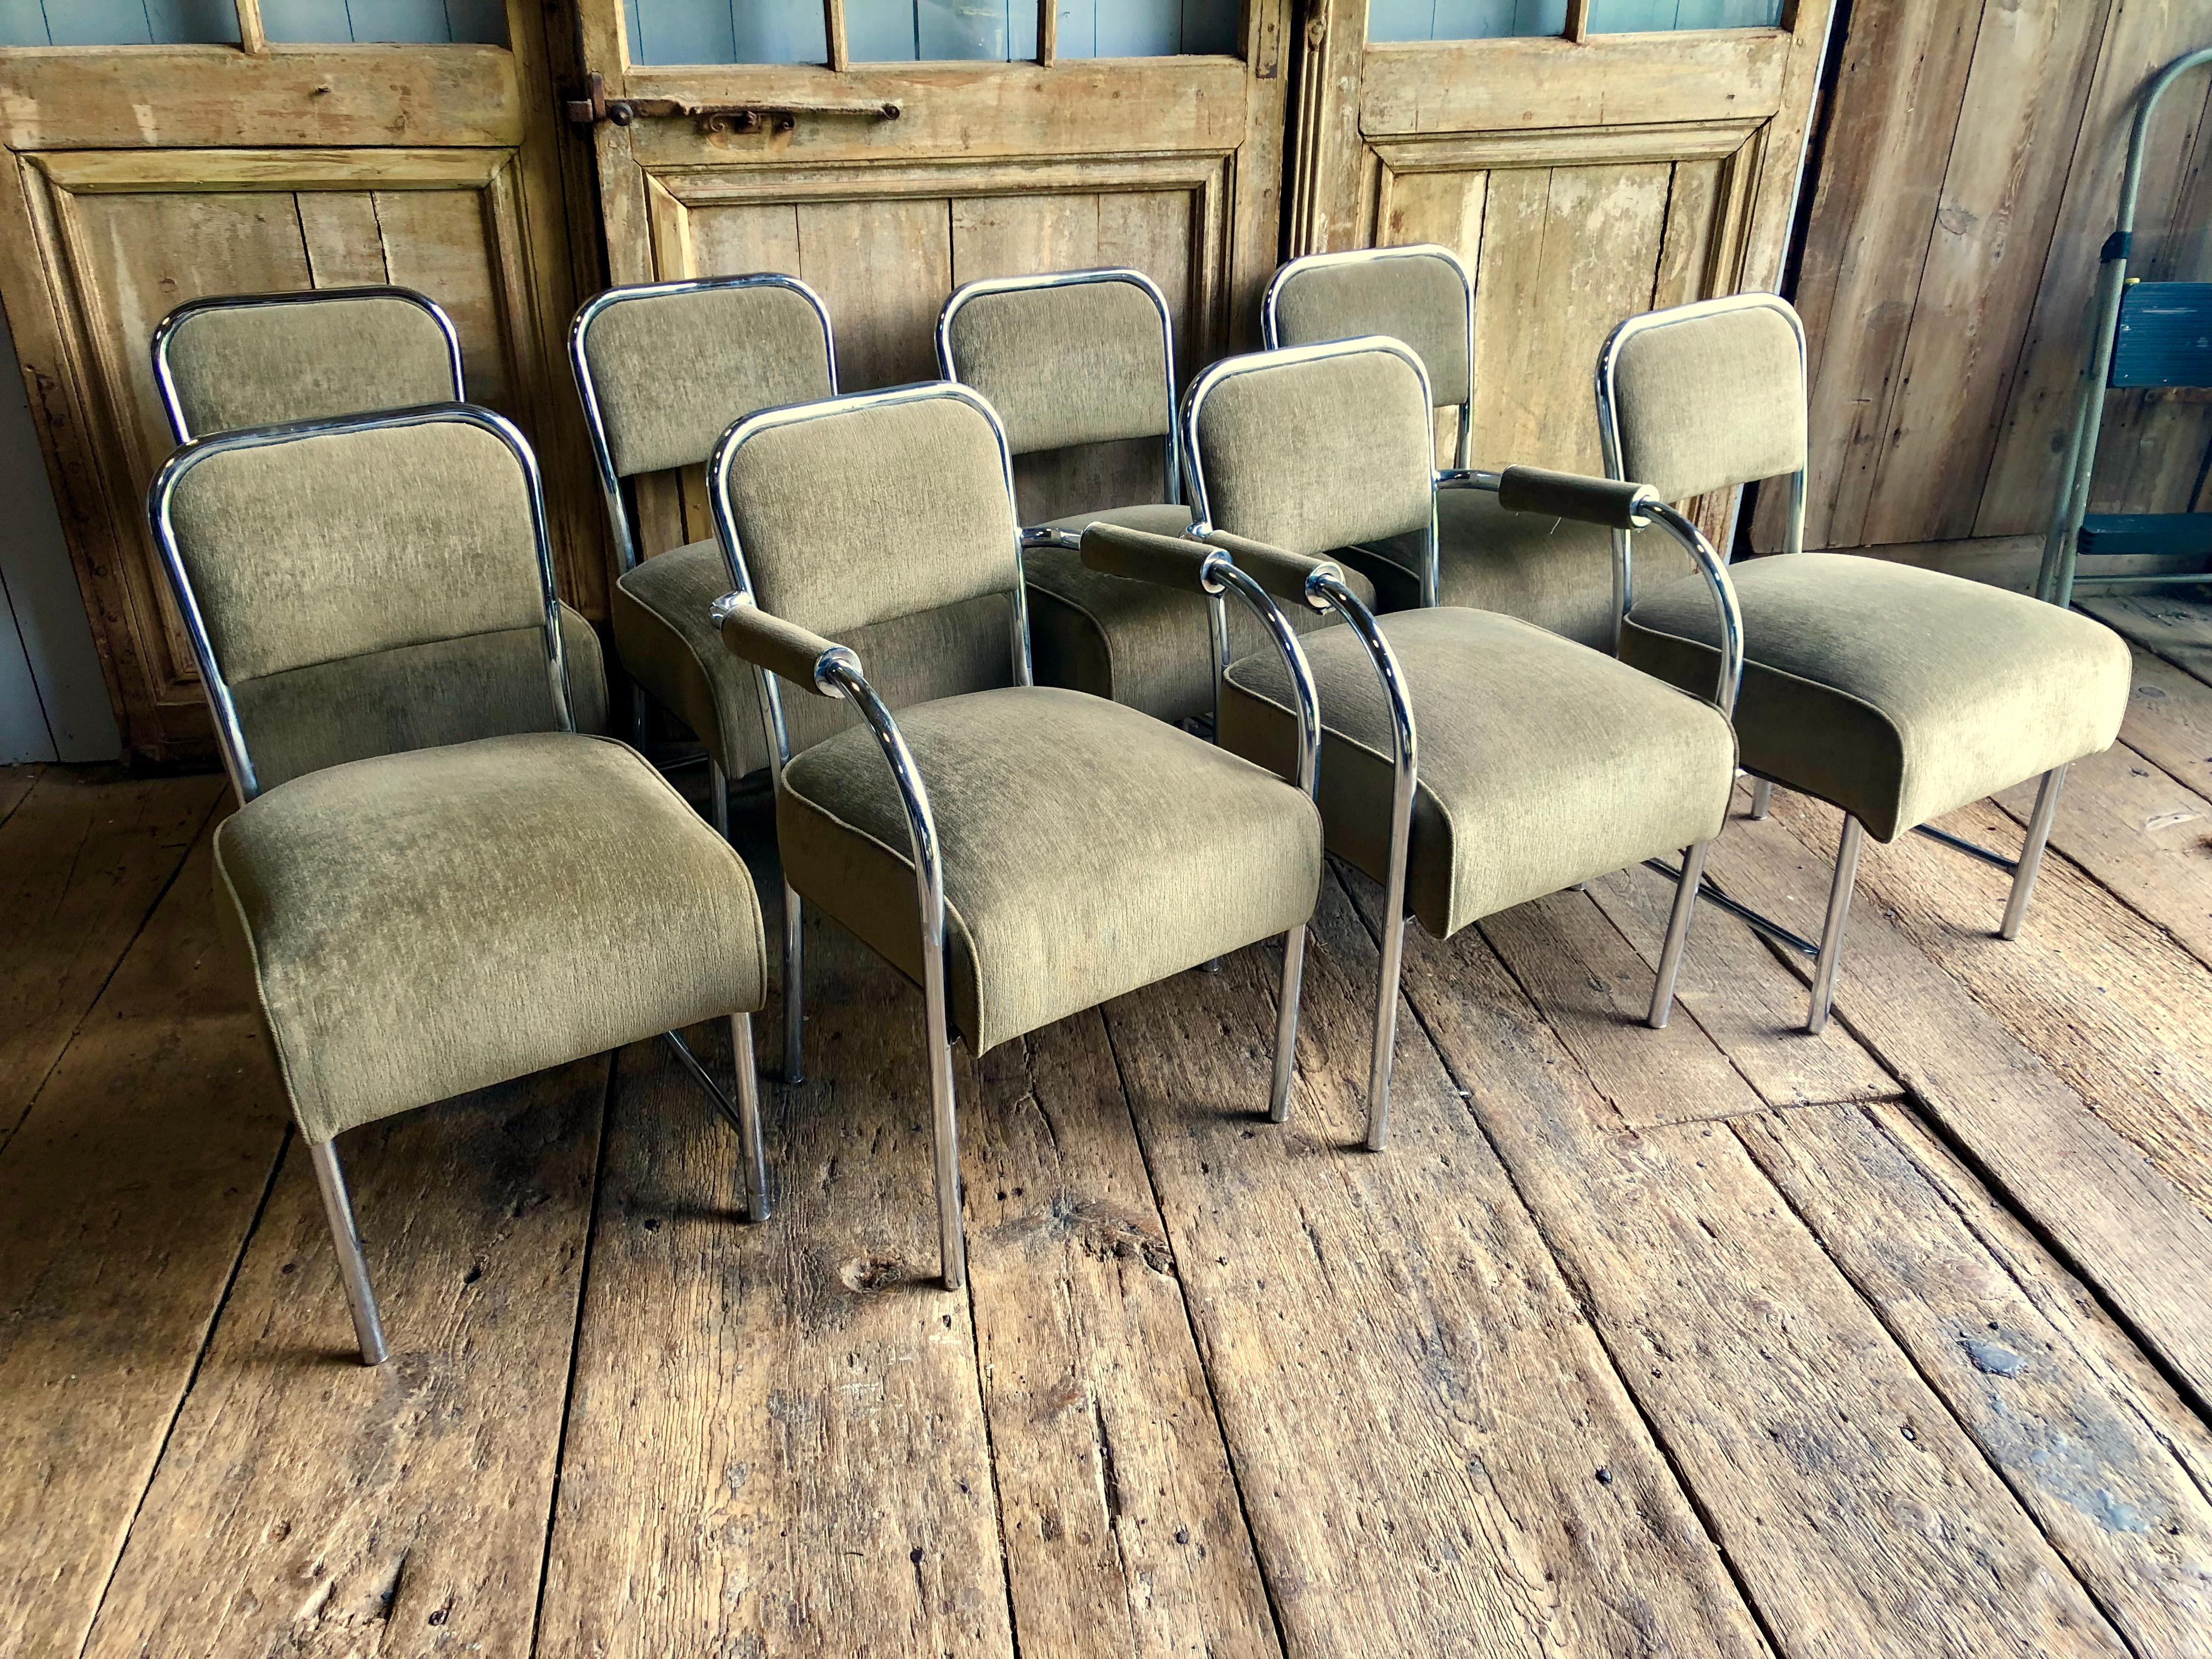 American Set of 8 Art Deco Style Chrome Dining Chairs